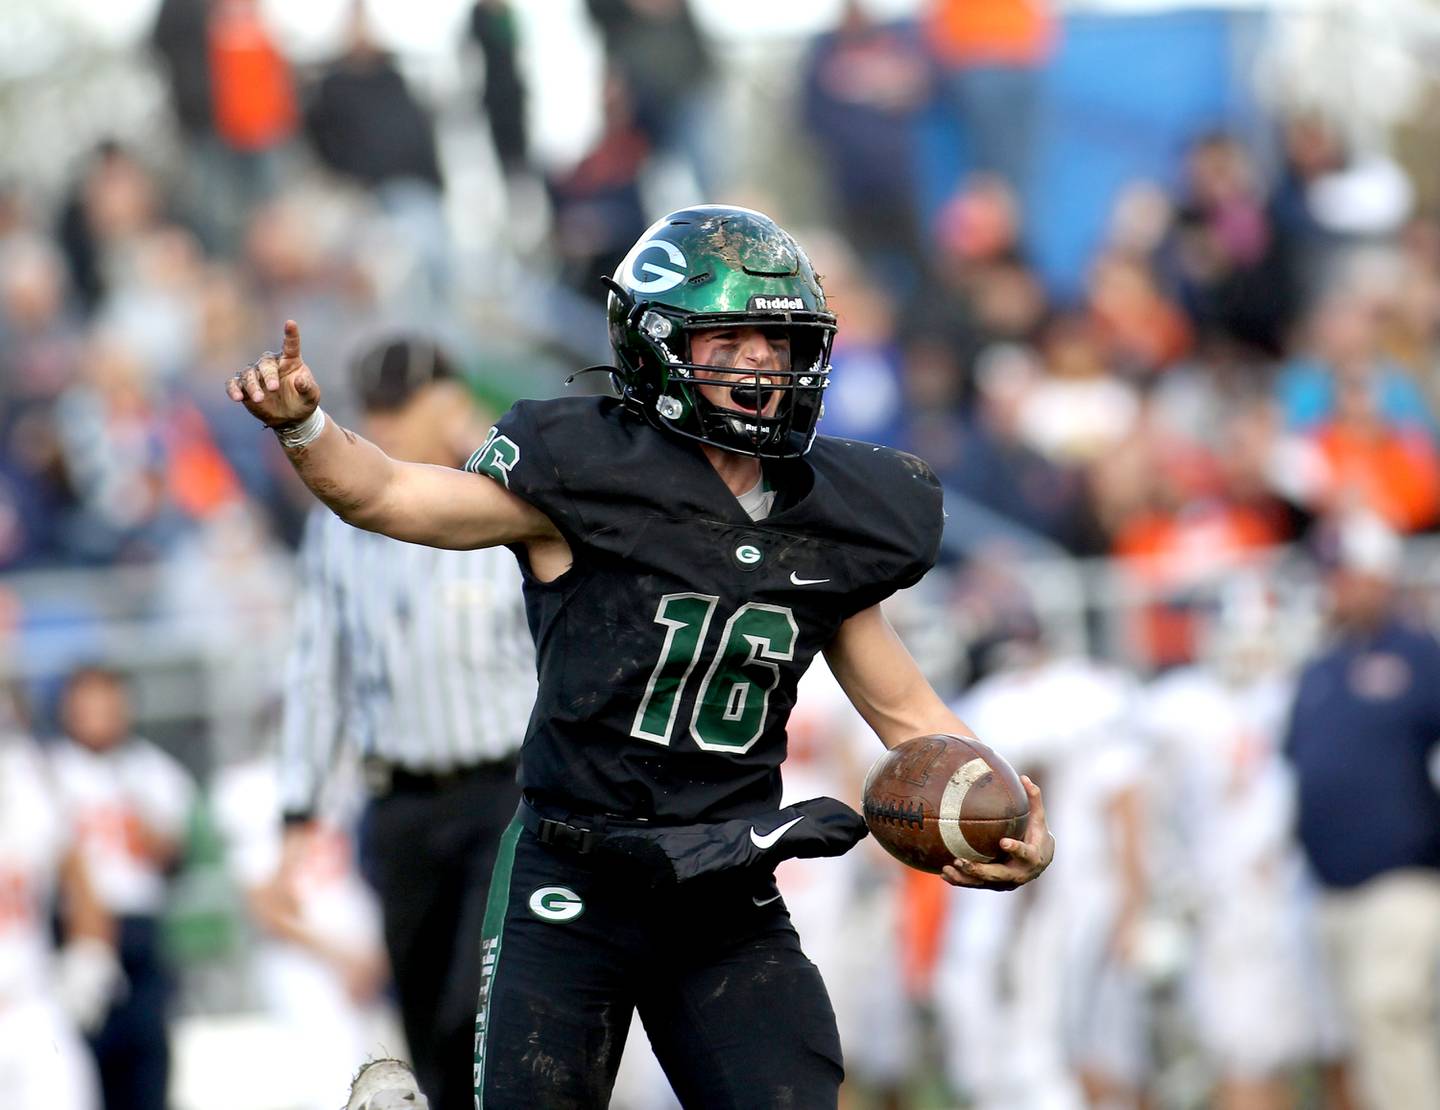 Glenbard West's Jacob Lachs celebrates a turnover during a Class 8A playoffs first-round game against Oswego in Glen Ellyn on Saturday, Oct. 30, 2021.